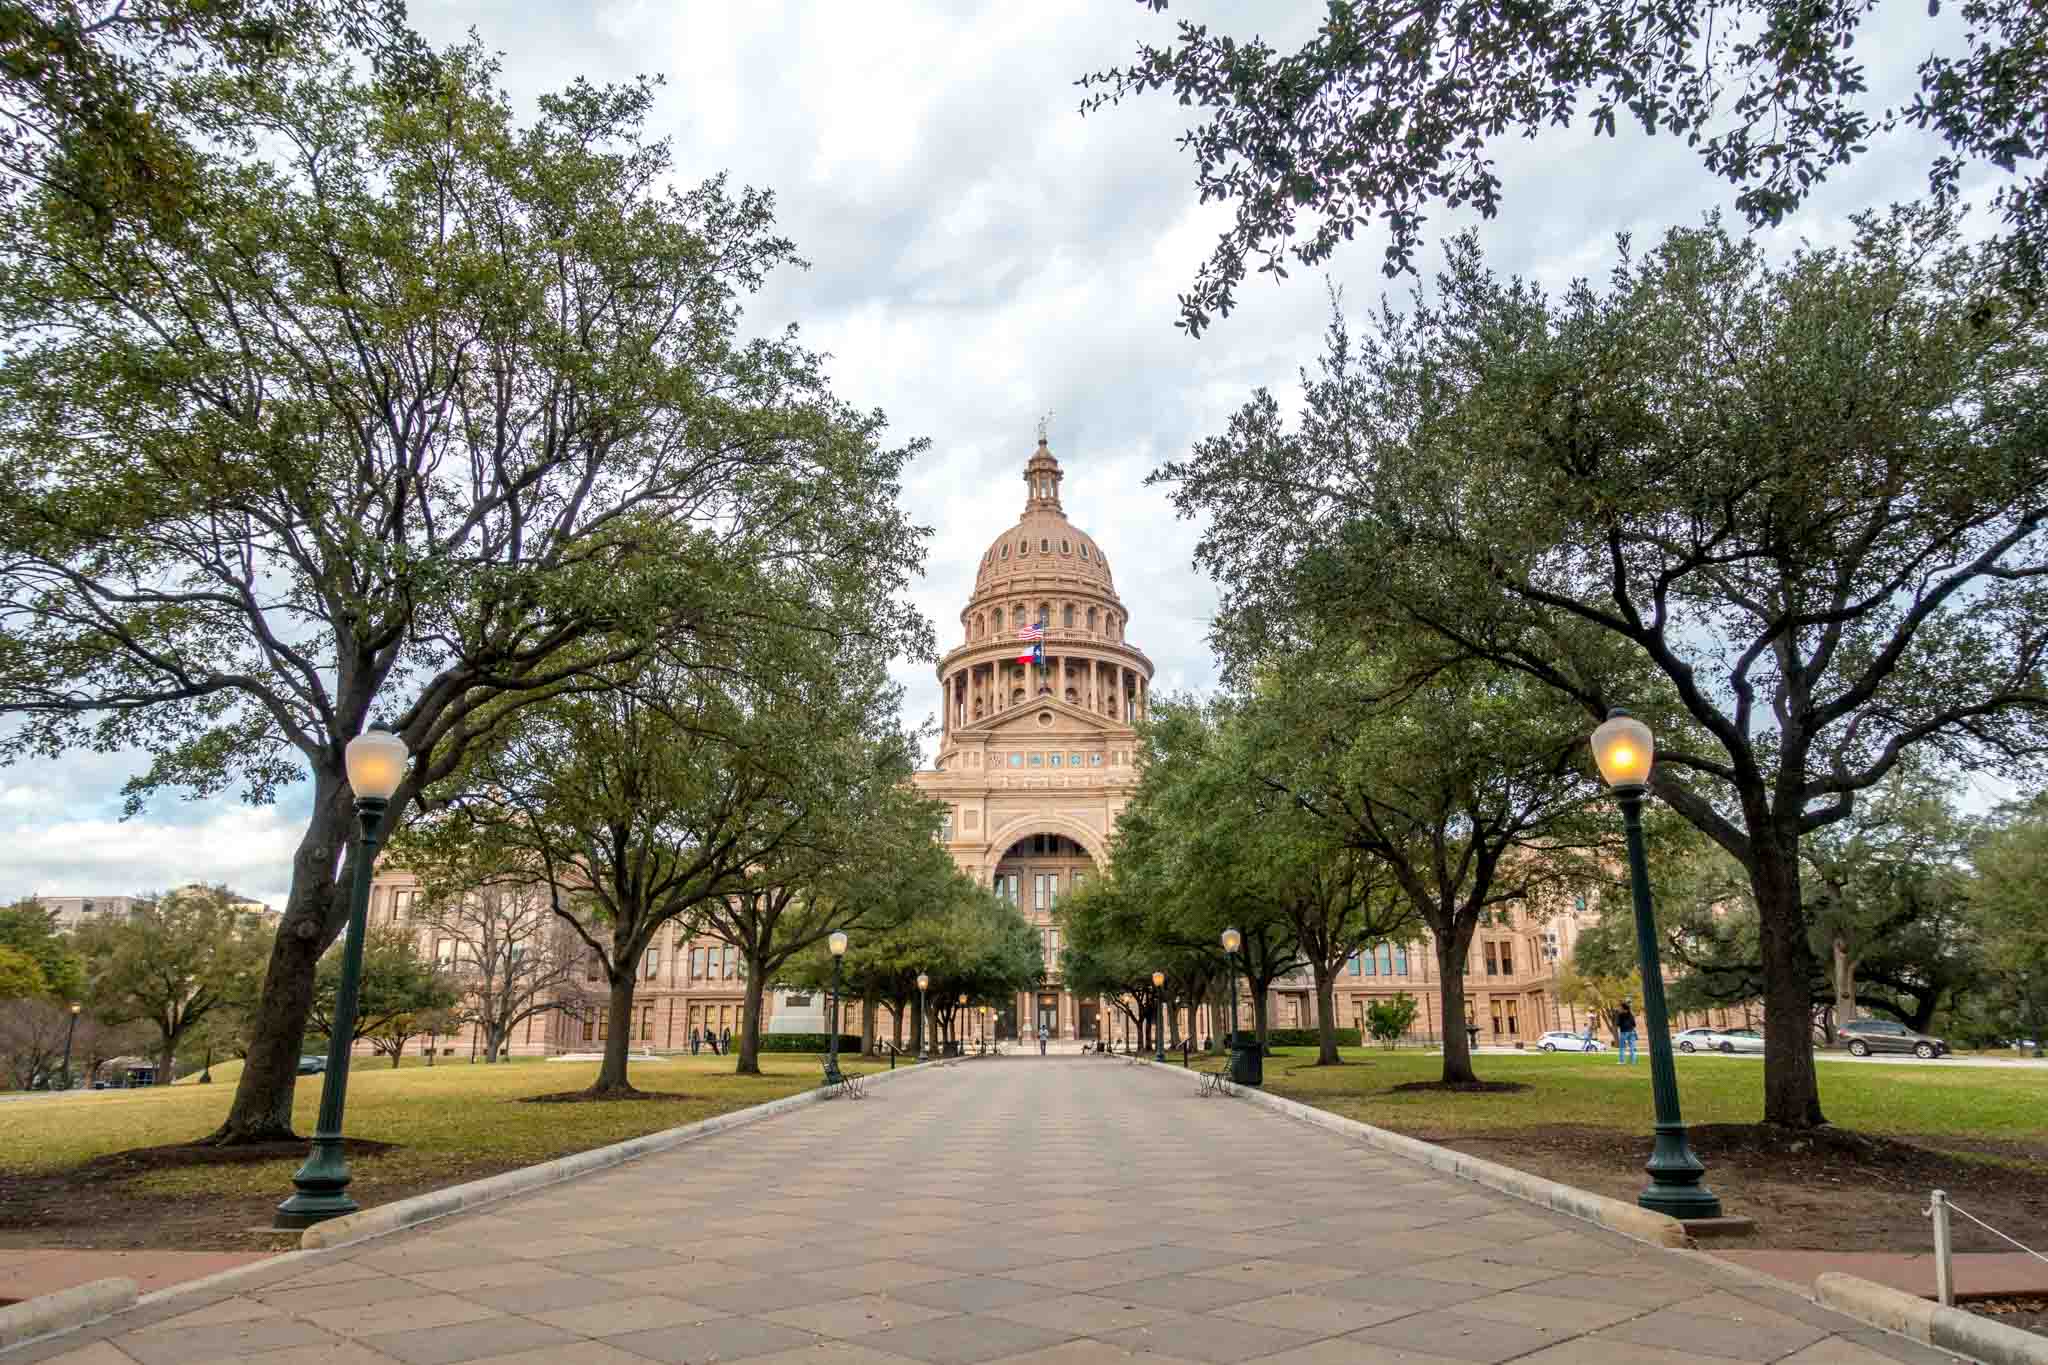 The Texas State Capitol is one of the unique places to visit in Austin TX